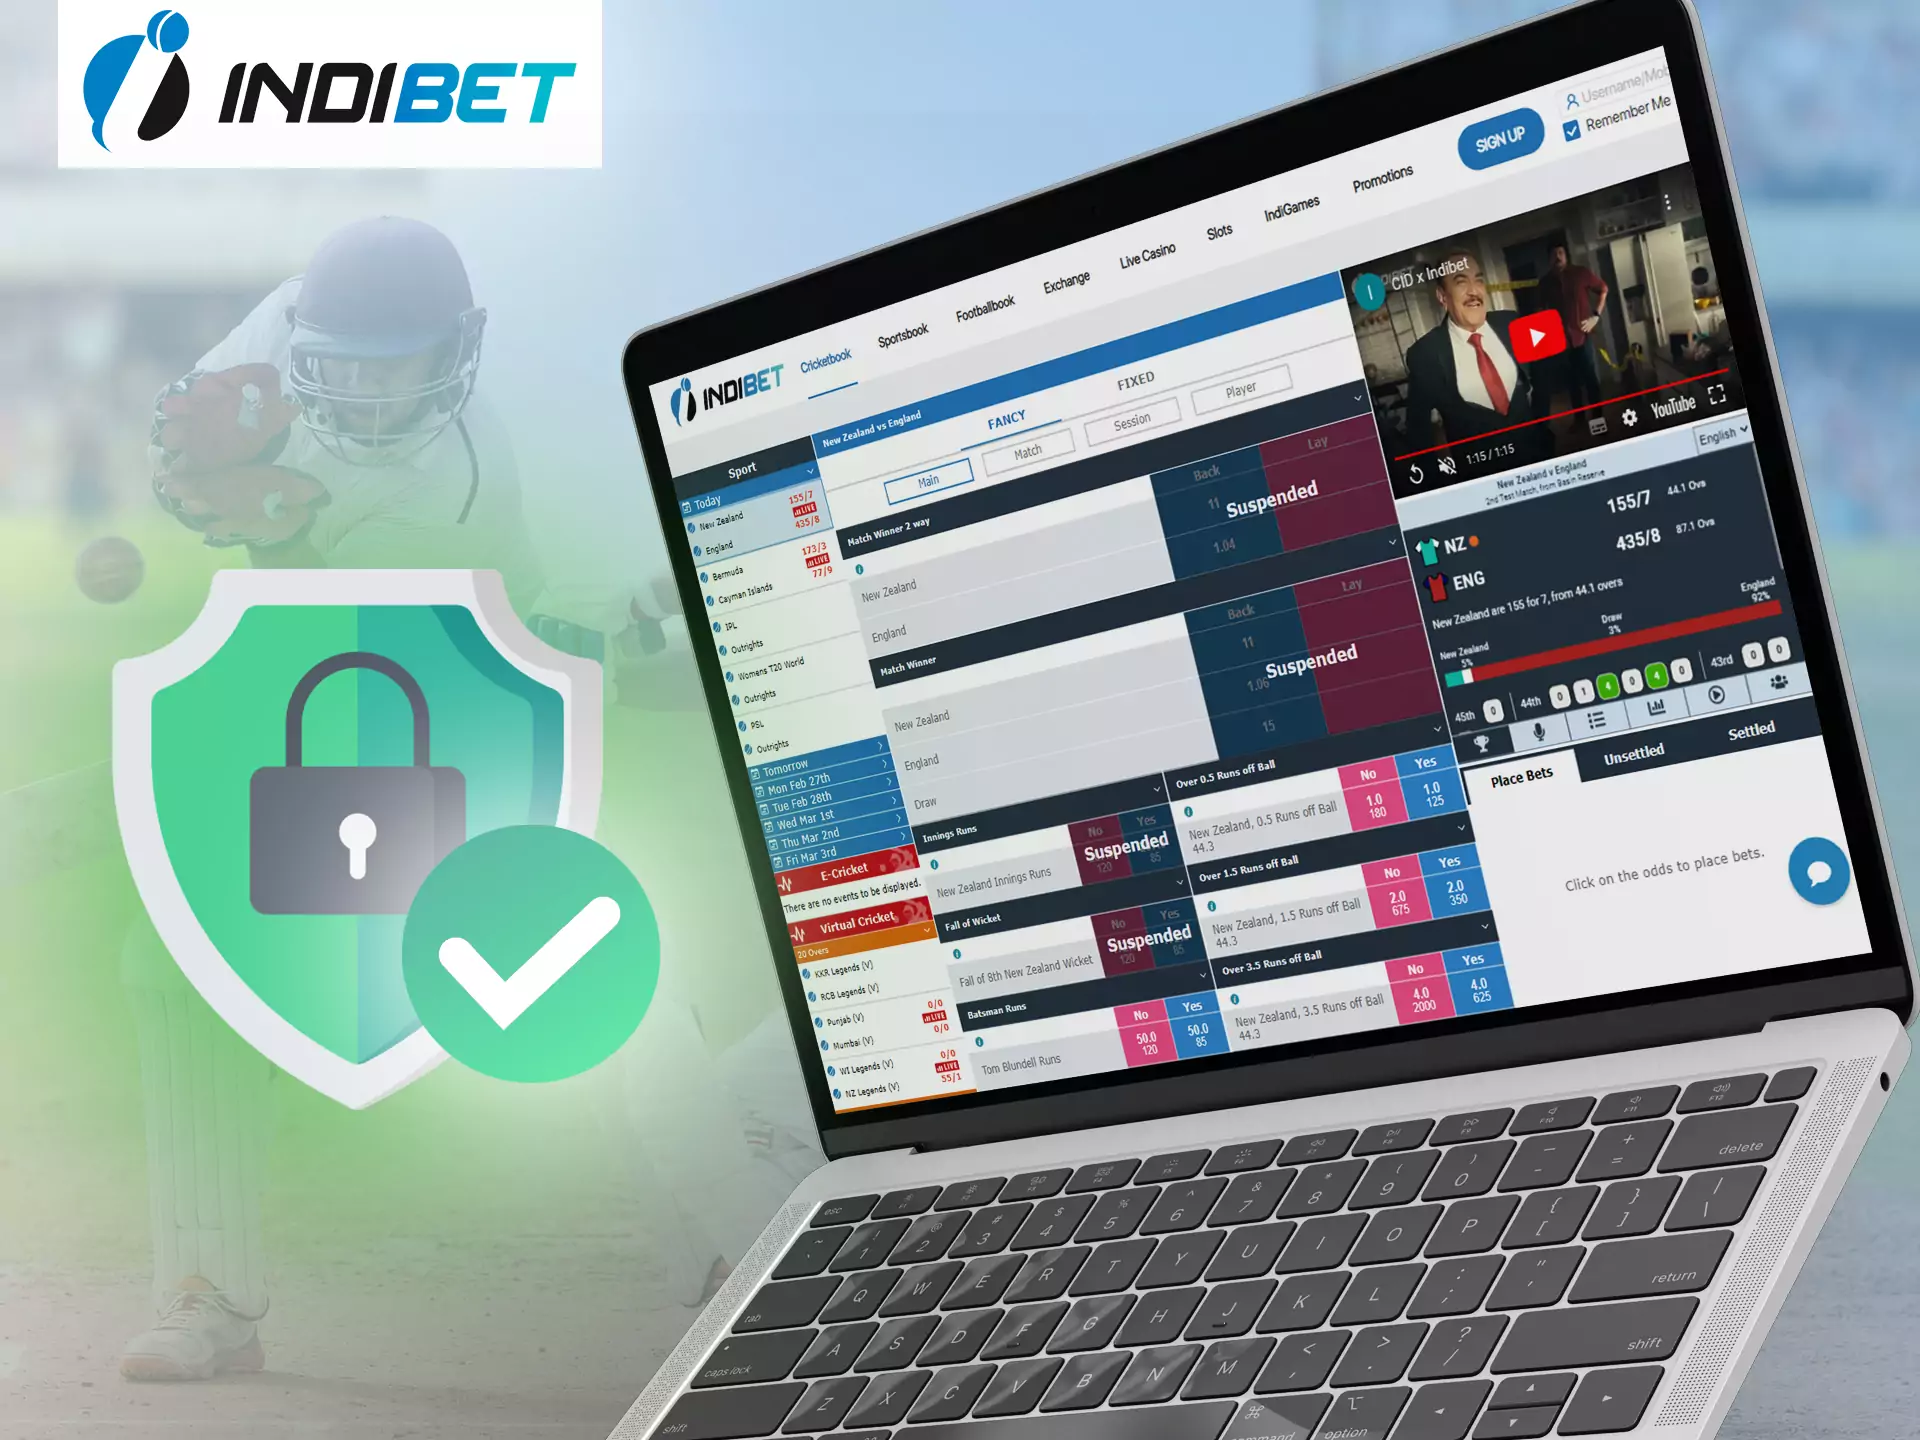 At Indibet, all user data is secure and protected.